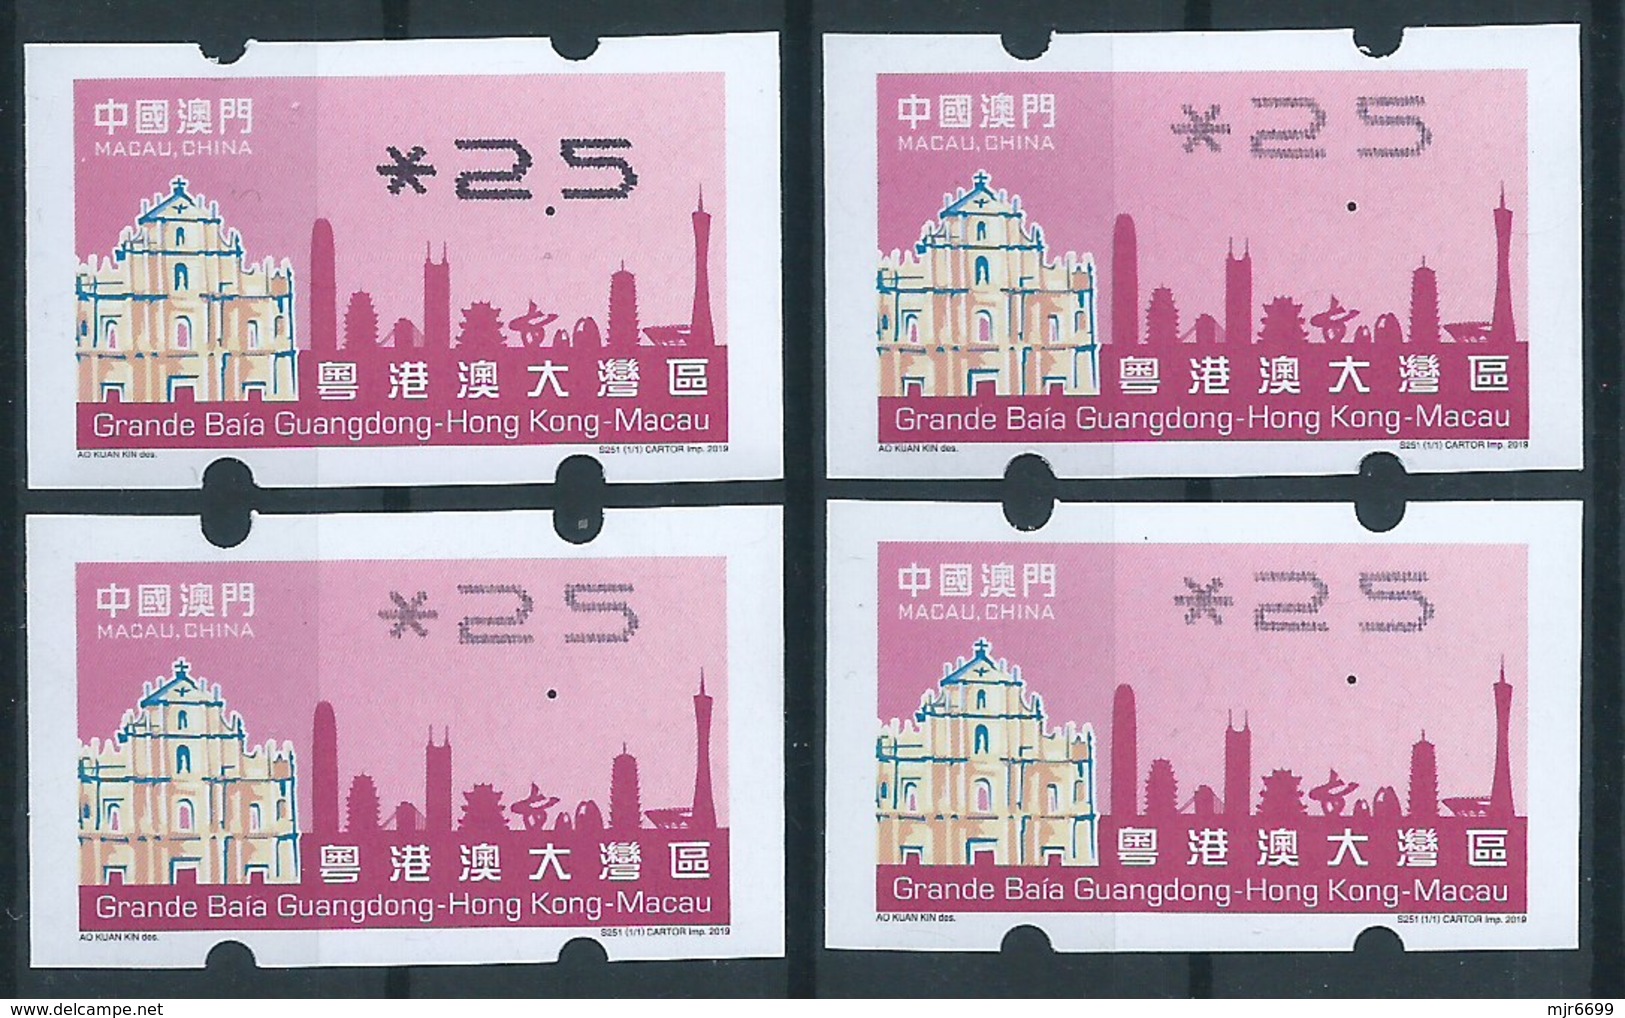 MACAU 2019 GUANDGONG, H.K. & MACAU GREAT BAY ATM LABELS 2.50PATACAS SHIFTED UP PRINT LOT OF 3, NORMAL FOR COMPARE - Distributeurs